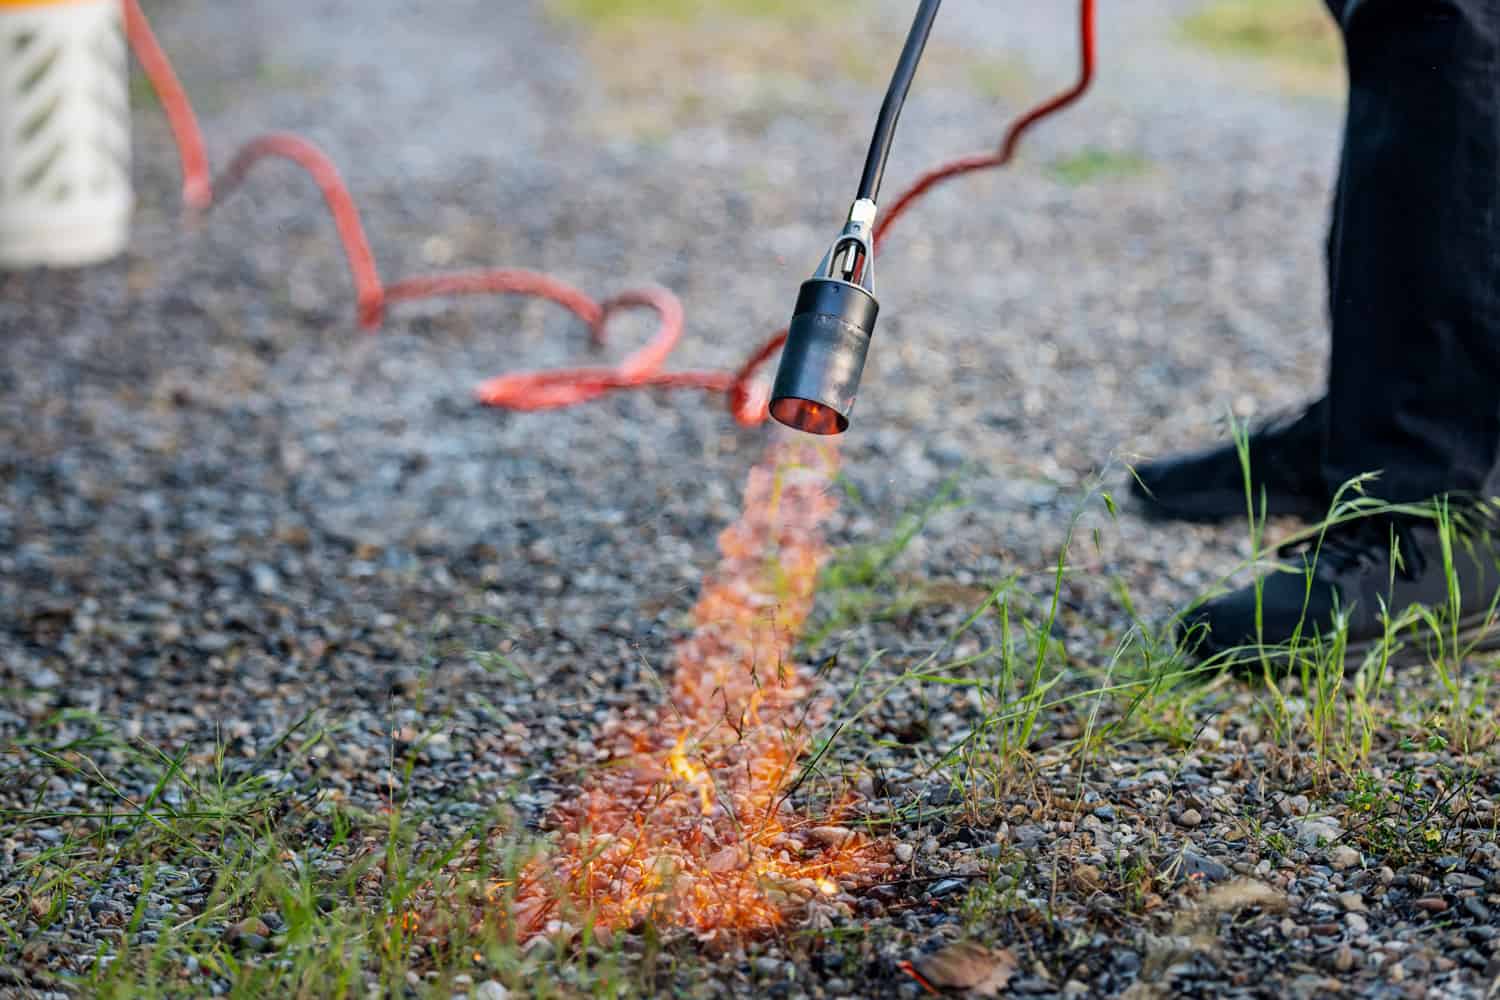 Gas powered weed burner lance burning weeds on a gravel driveway.